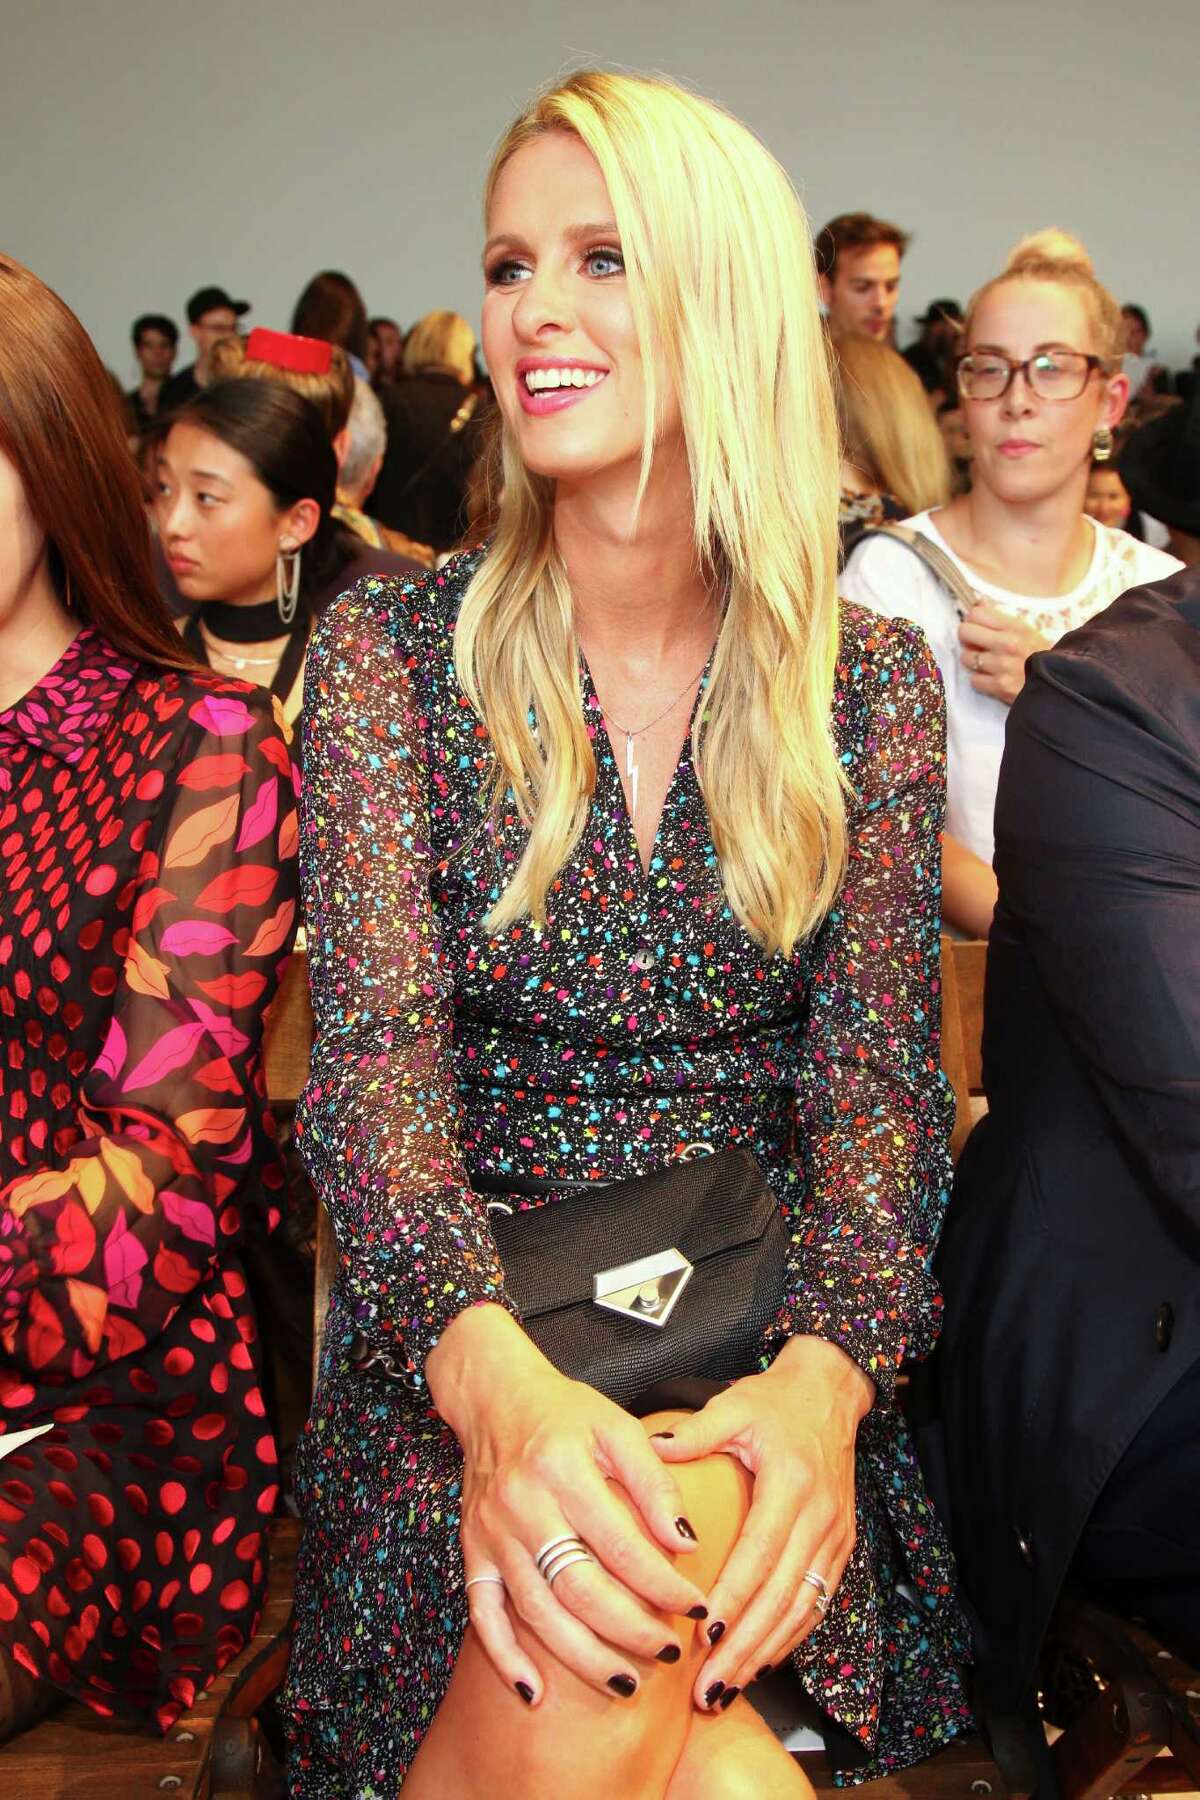 Nicky Hilton attends the New York Fashion Week Spring/Summer 2016 Diane von Furstenberg fashion show on Sunday, Sept. 13, 2015, in New York. (Photo by Andy Kropa/Invision/AP) ORG XMIT: NYAK105